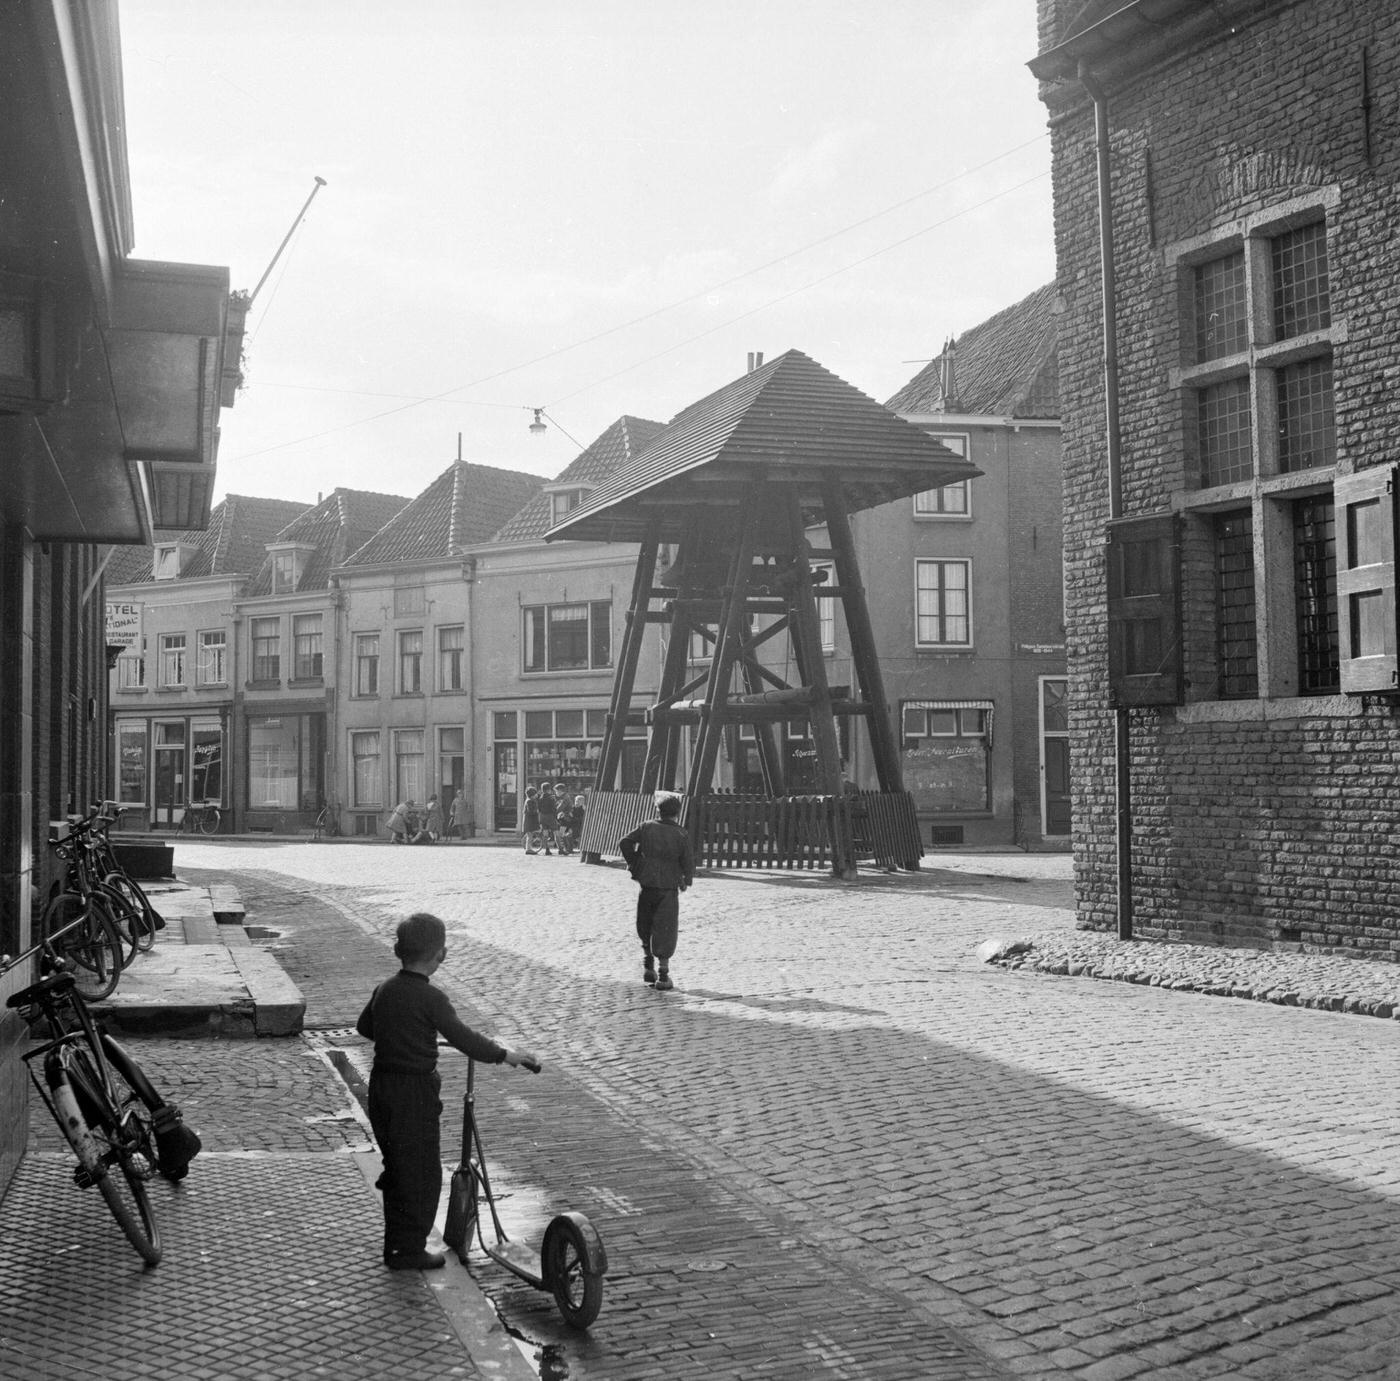 Child of the Haanapel family holds his scooter and watches the street in Doesburg, Netherlands, 16th May 1953.